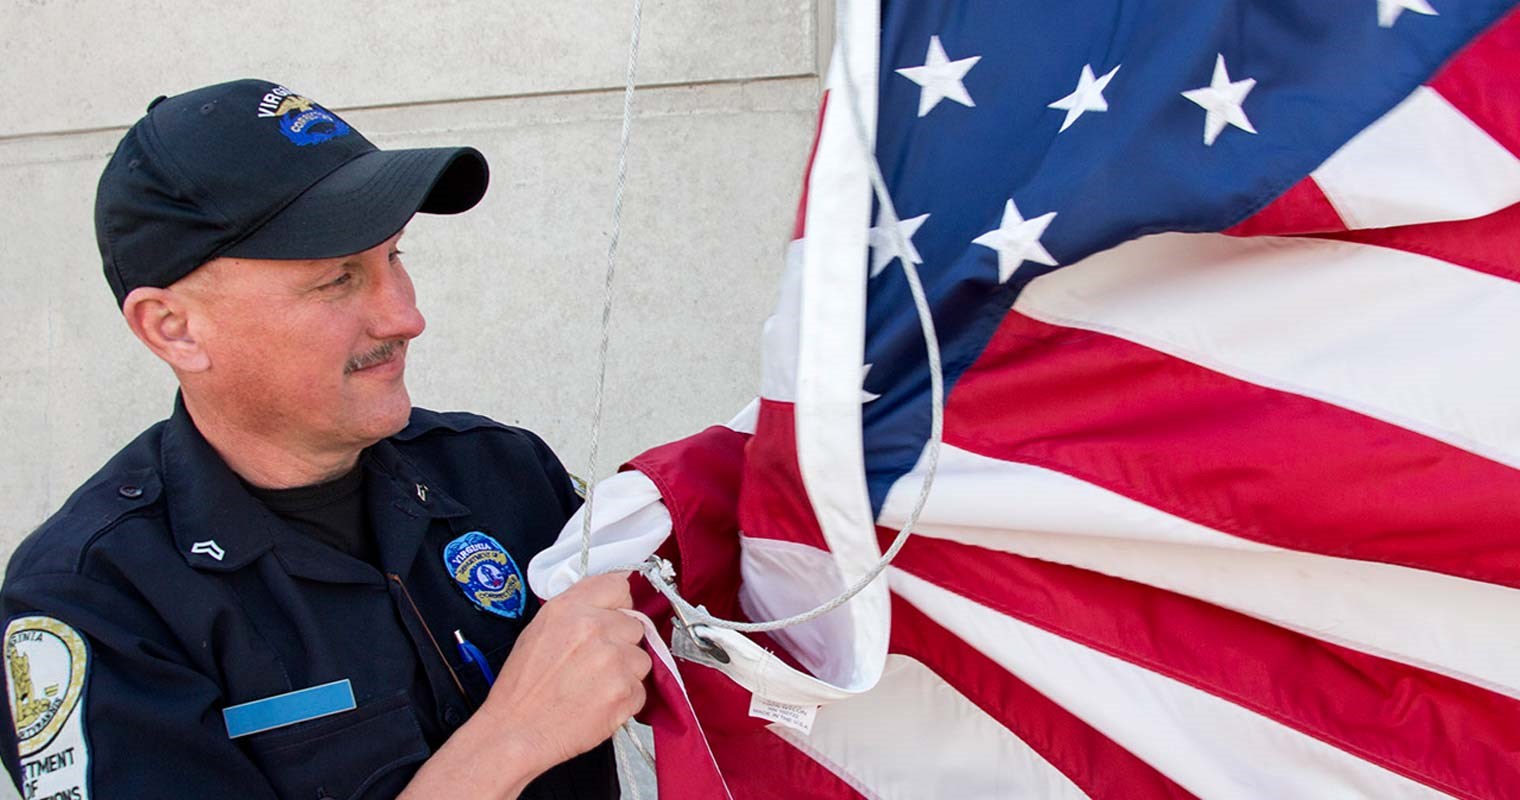 VADOC Corrections Officer Raises an American Flag